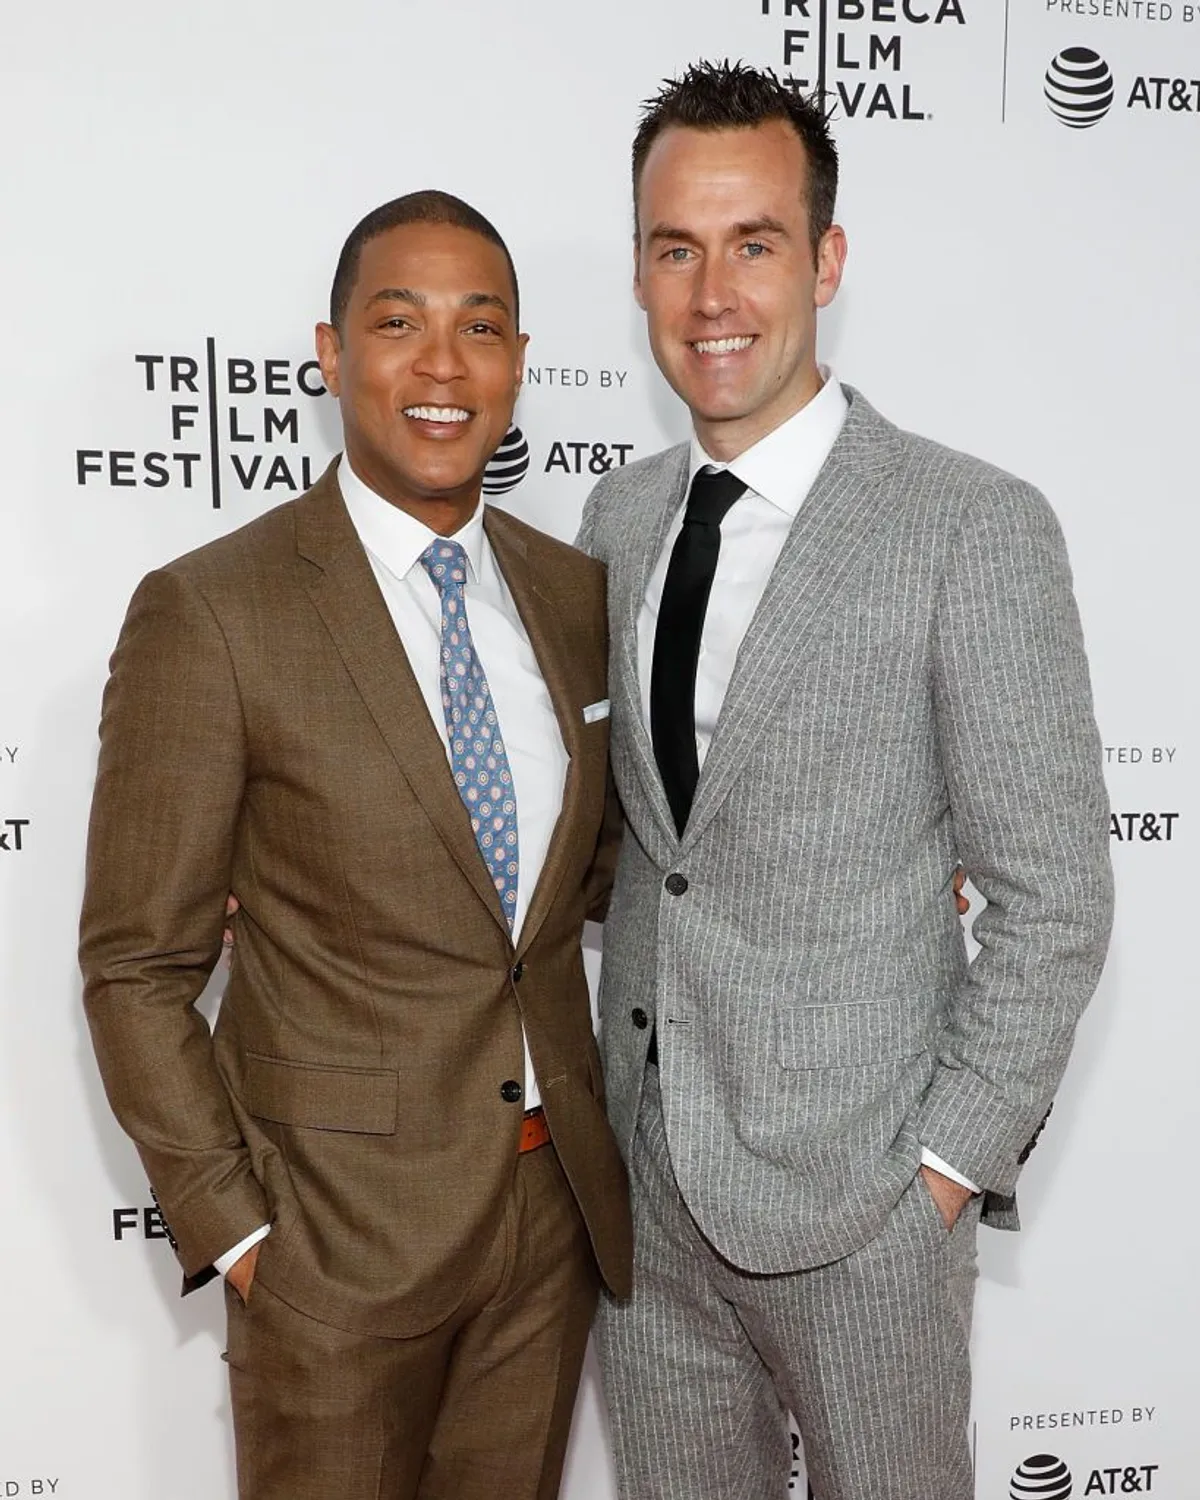 Don Lemon and fiancé Tim Malone at the "Clive Davis: The Soundtrack Of Our Lives" opening gala of the Tribeca Film Festival on April 19, 2017 | Photo: Getty Images